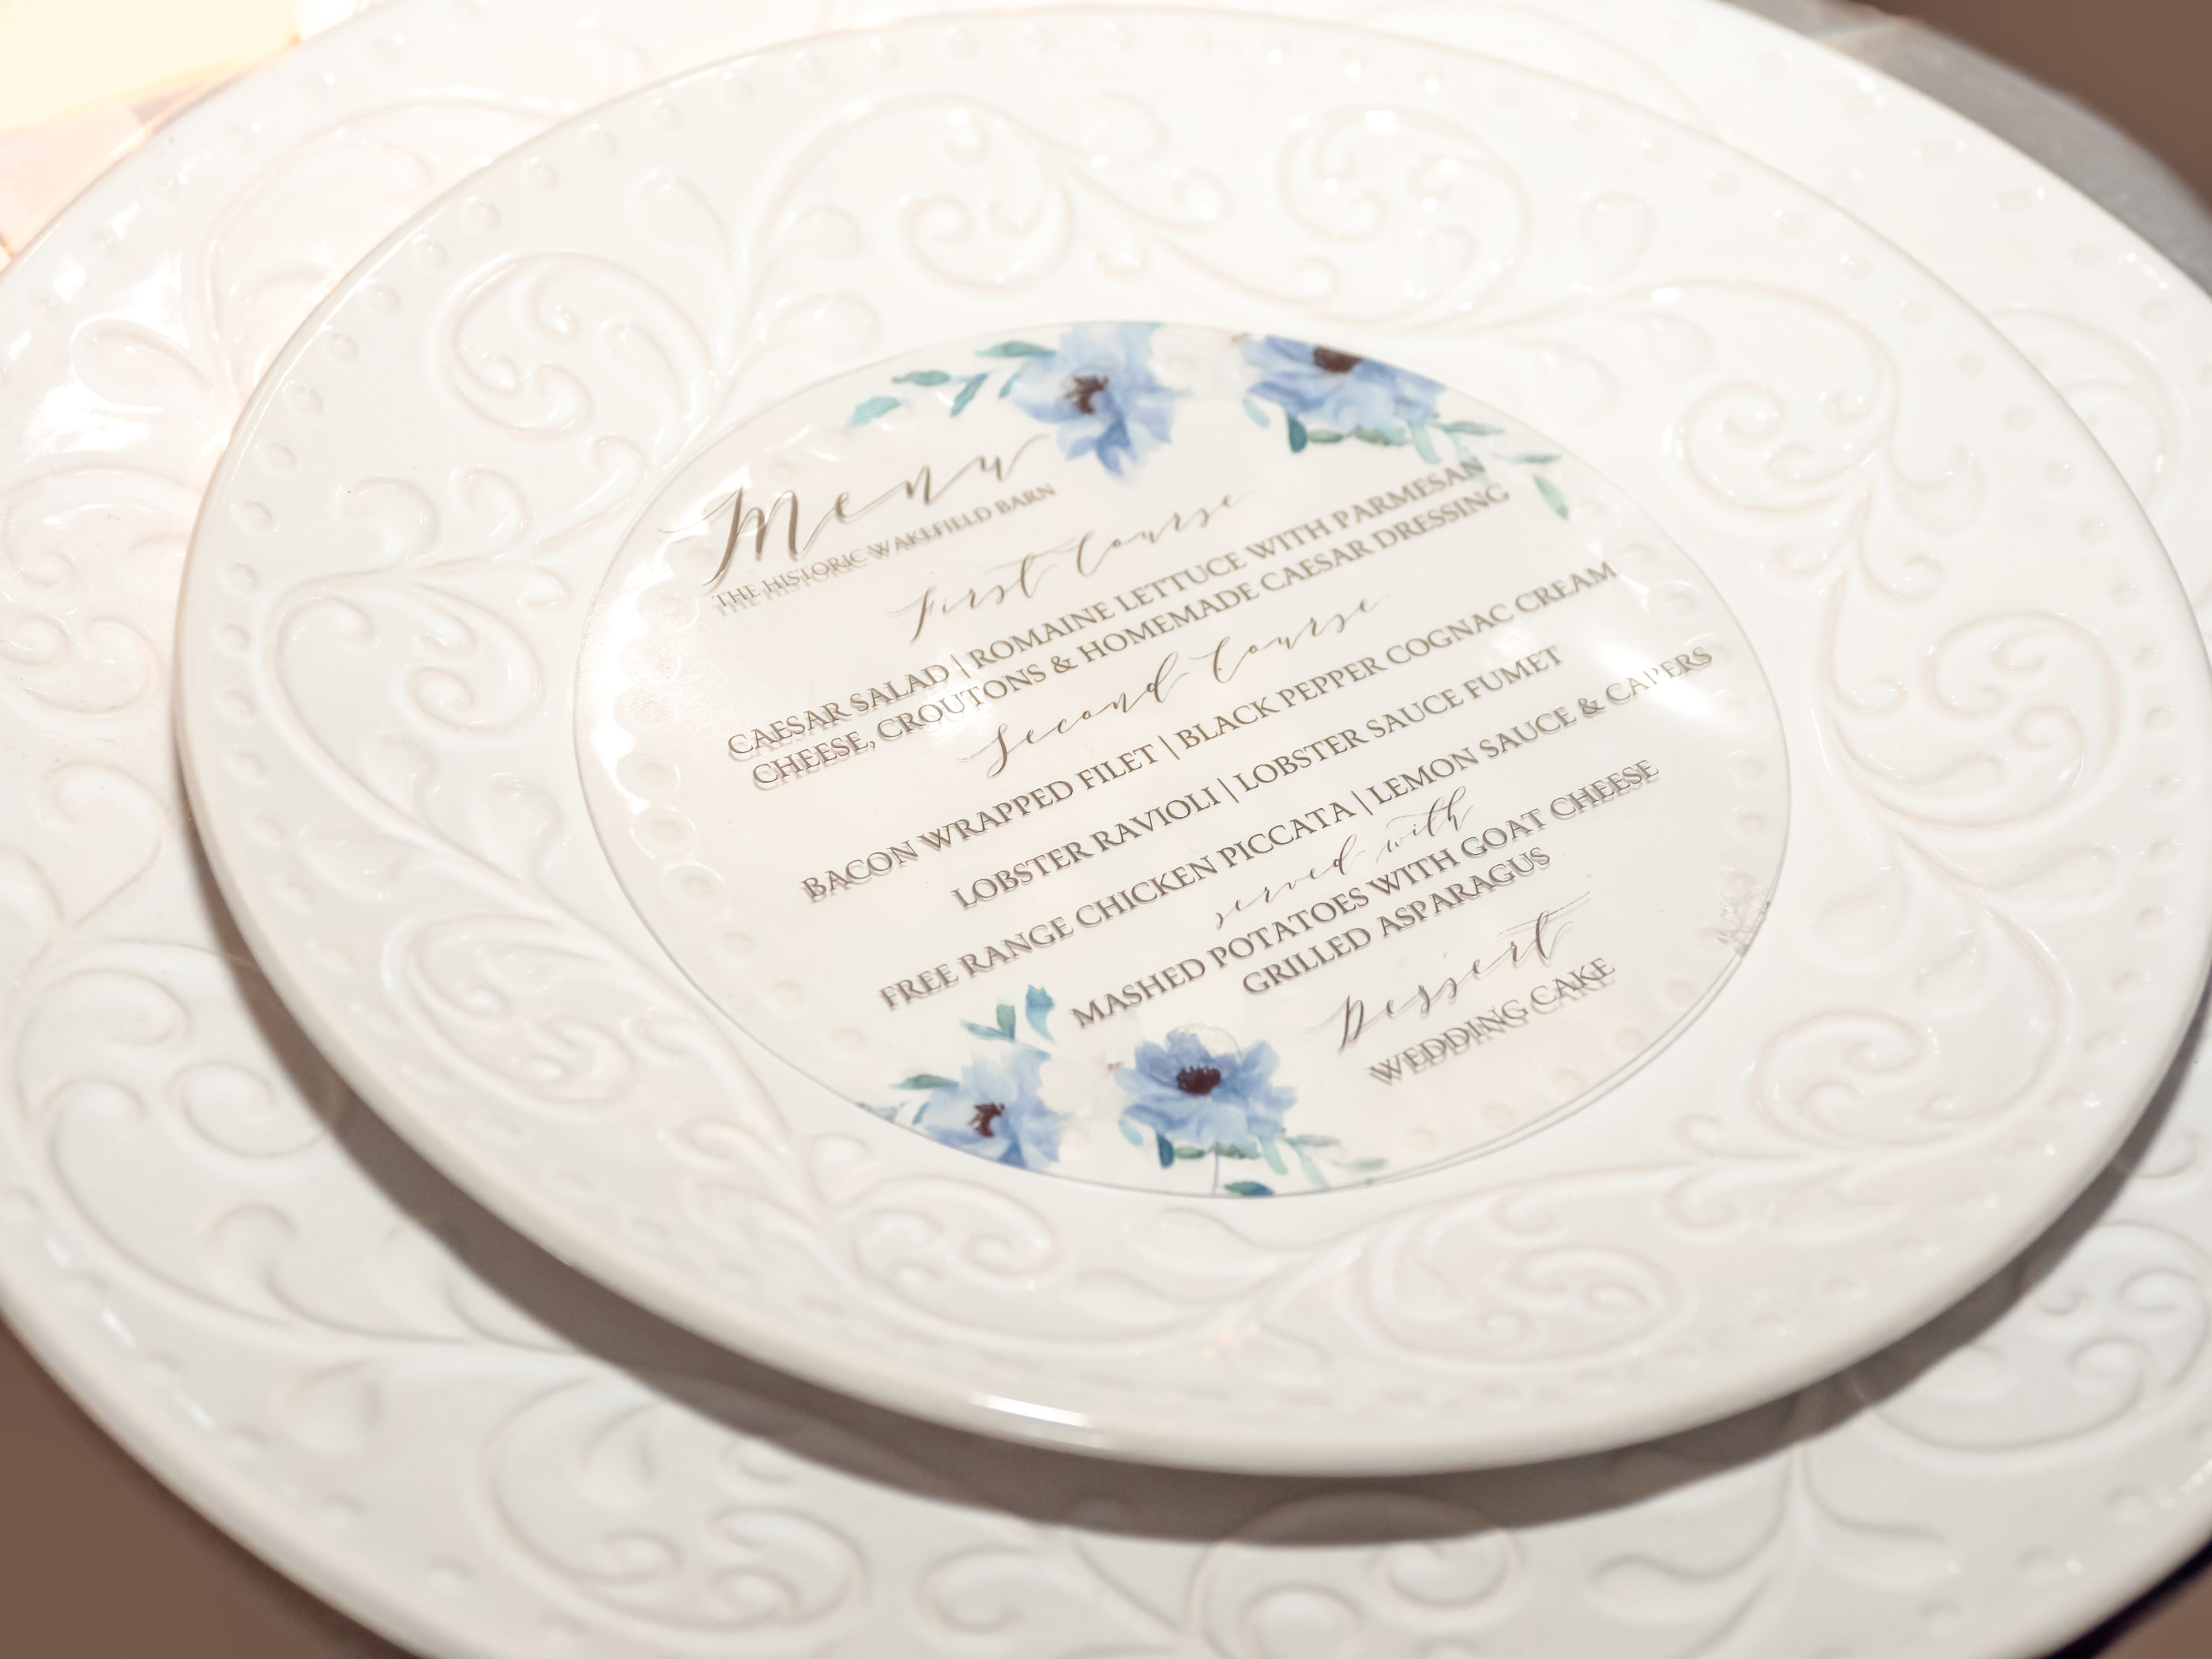 reception menu printed on clear acetate and cut into circle shape to lay inside of salad plate